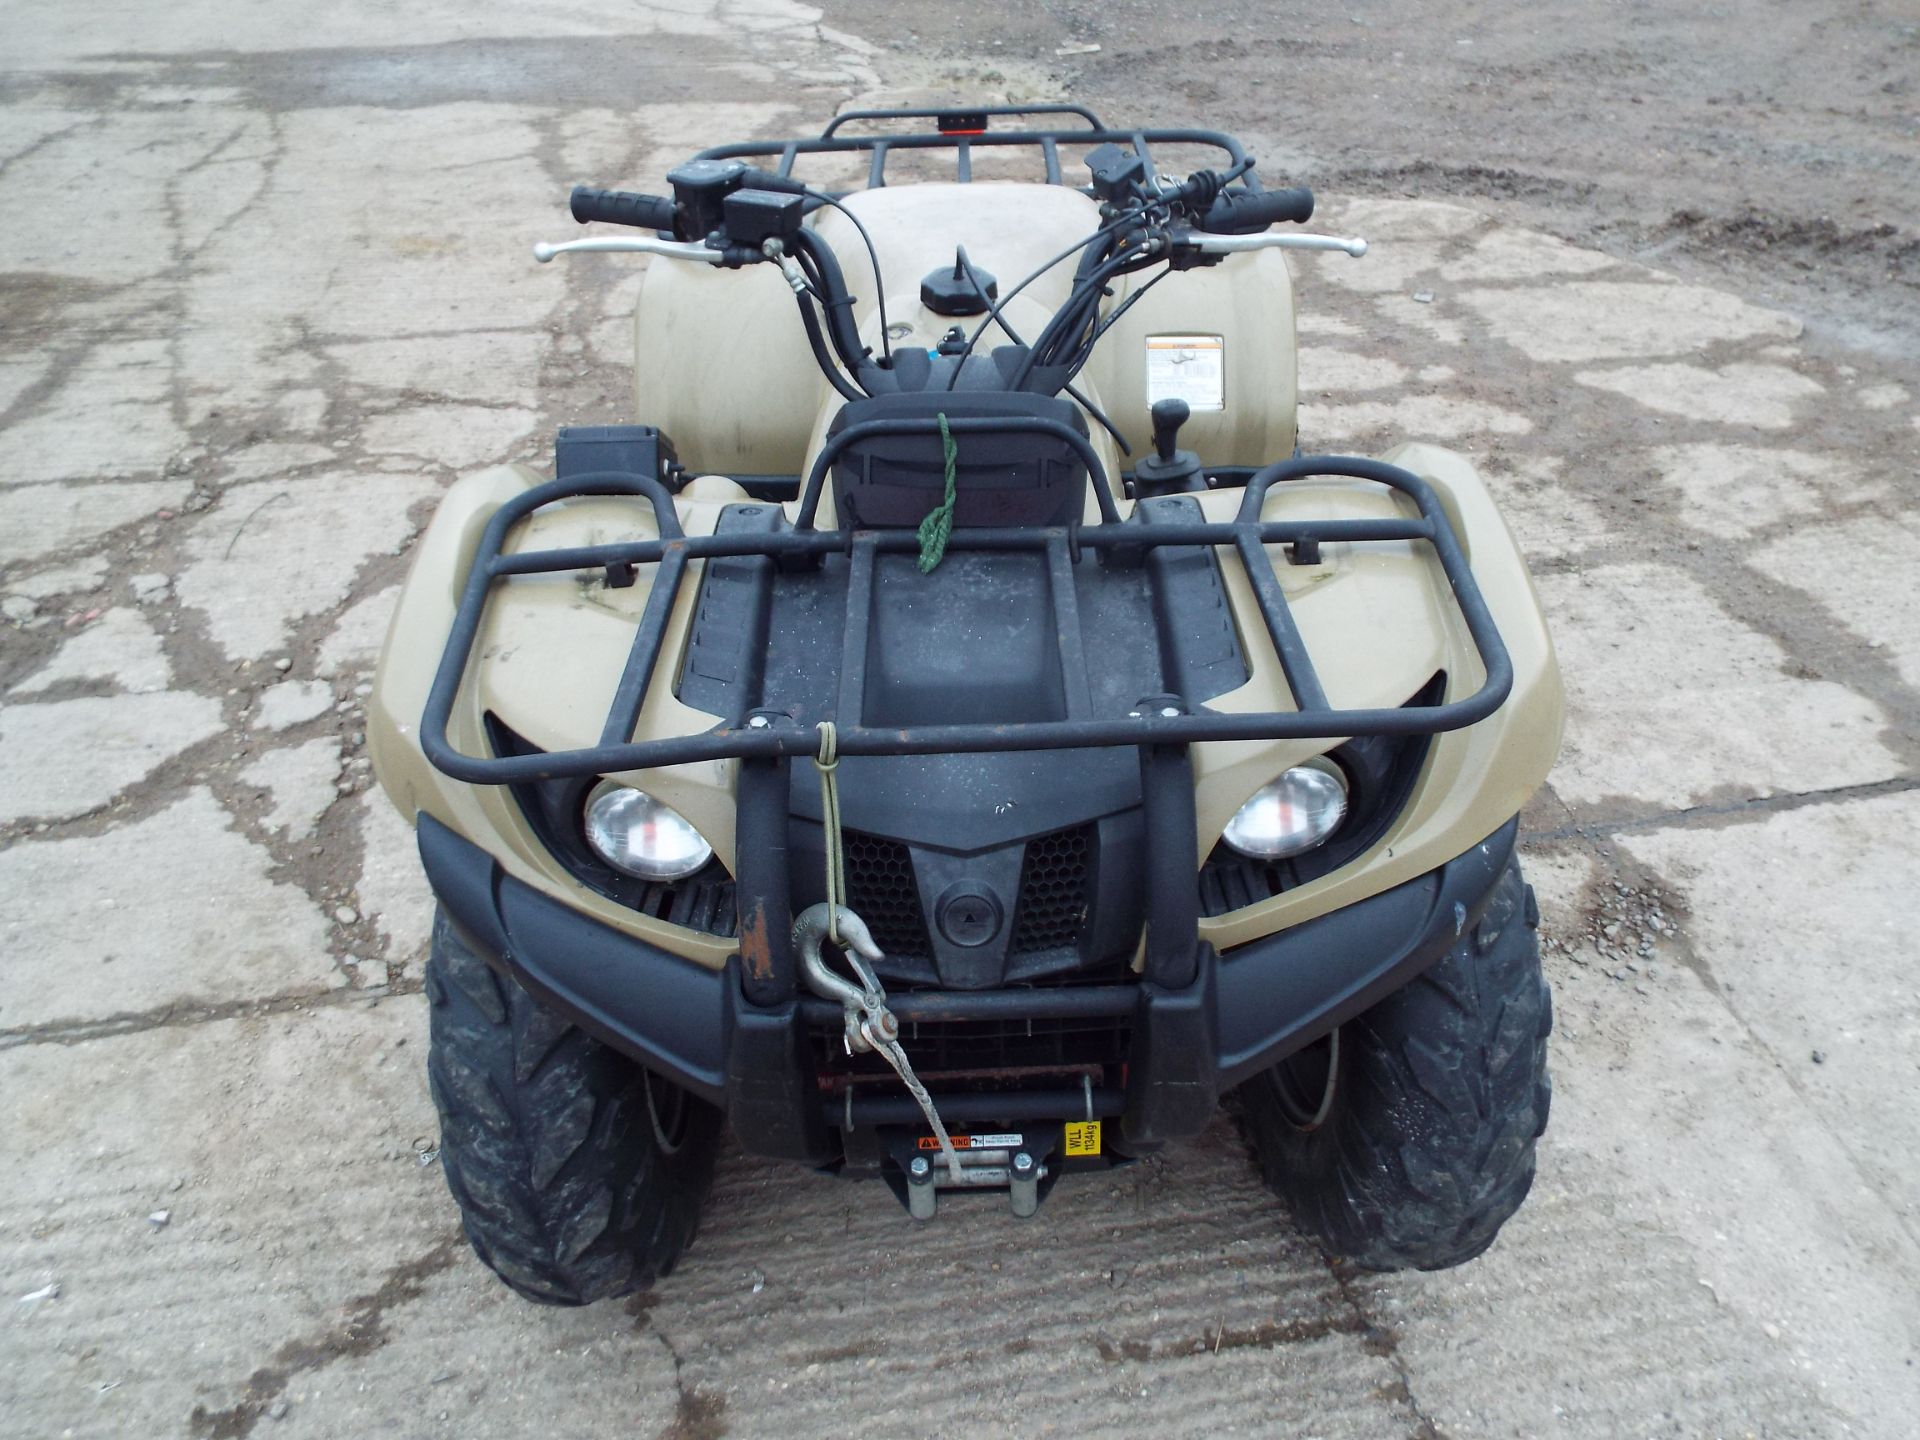 Military Specification Yamaha Grizzly 450 4 x 4 ATV Quad Bike Complete with Winch - Image 2 of 20